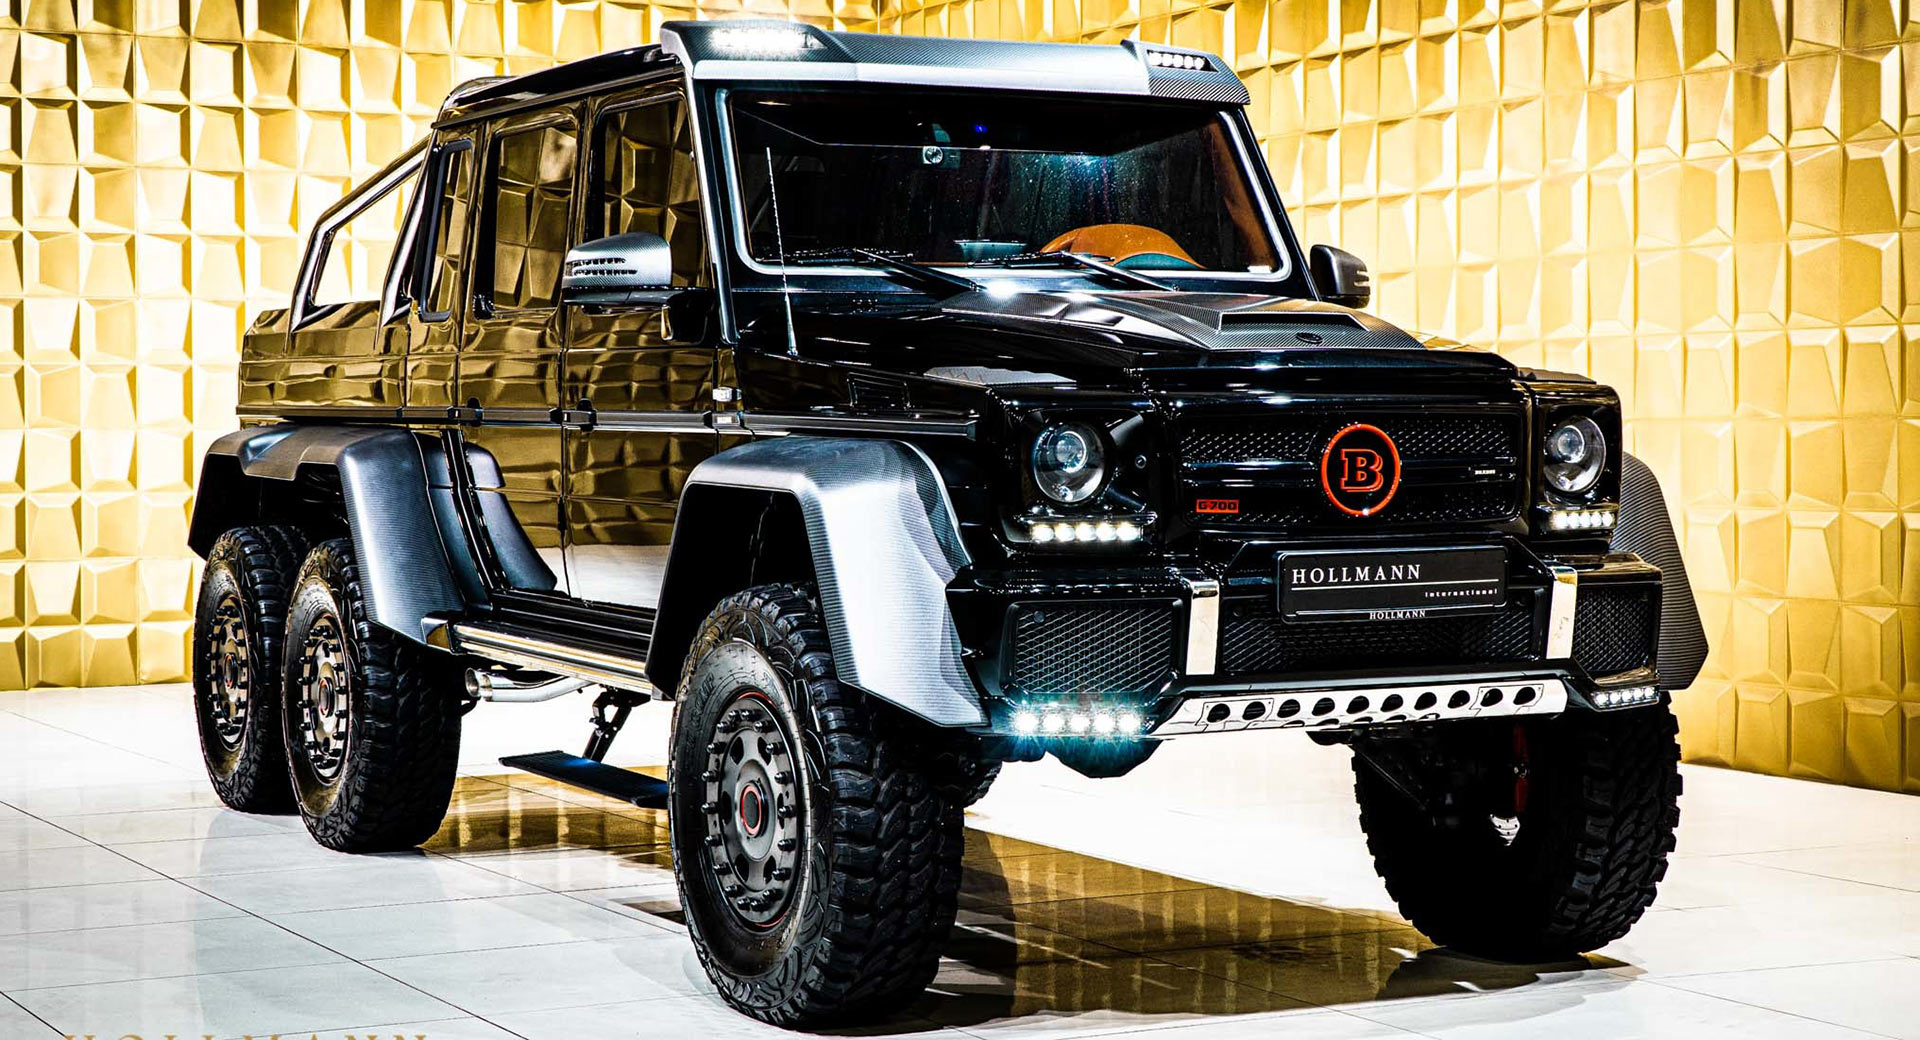 Brabus G Wagon Prijs Mercedes-Benz G63 AMG 6×6 By Brabus Has 700 HP, $1 Million Price Tag |  Carscoops